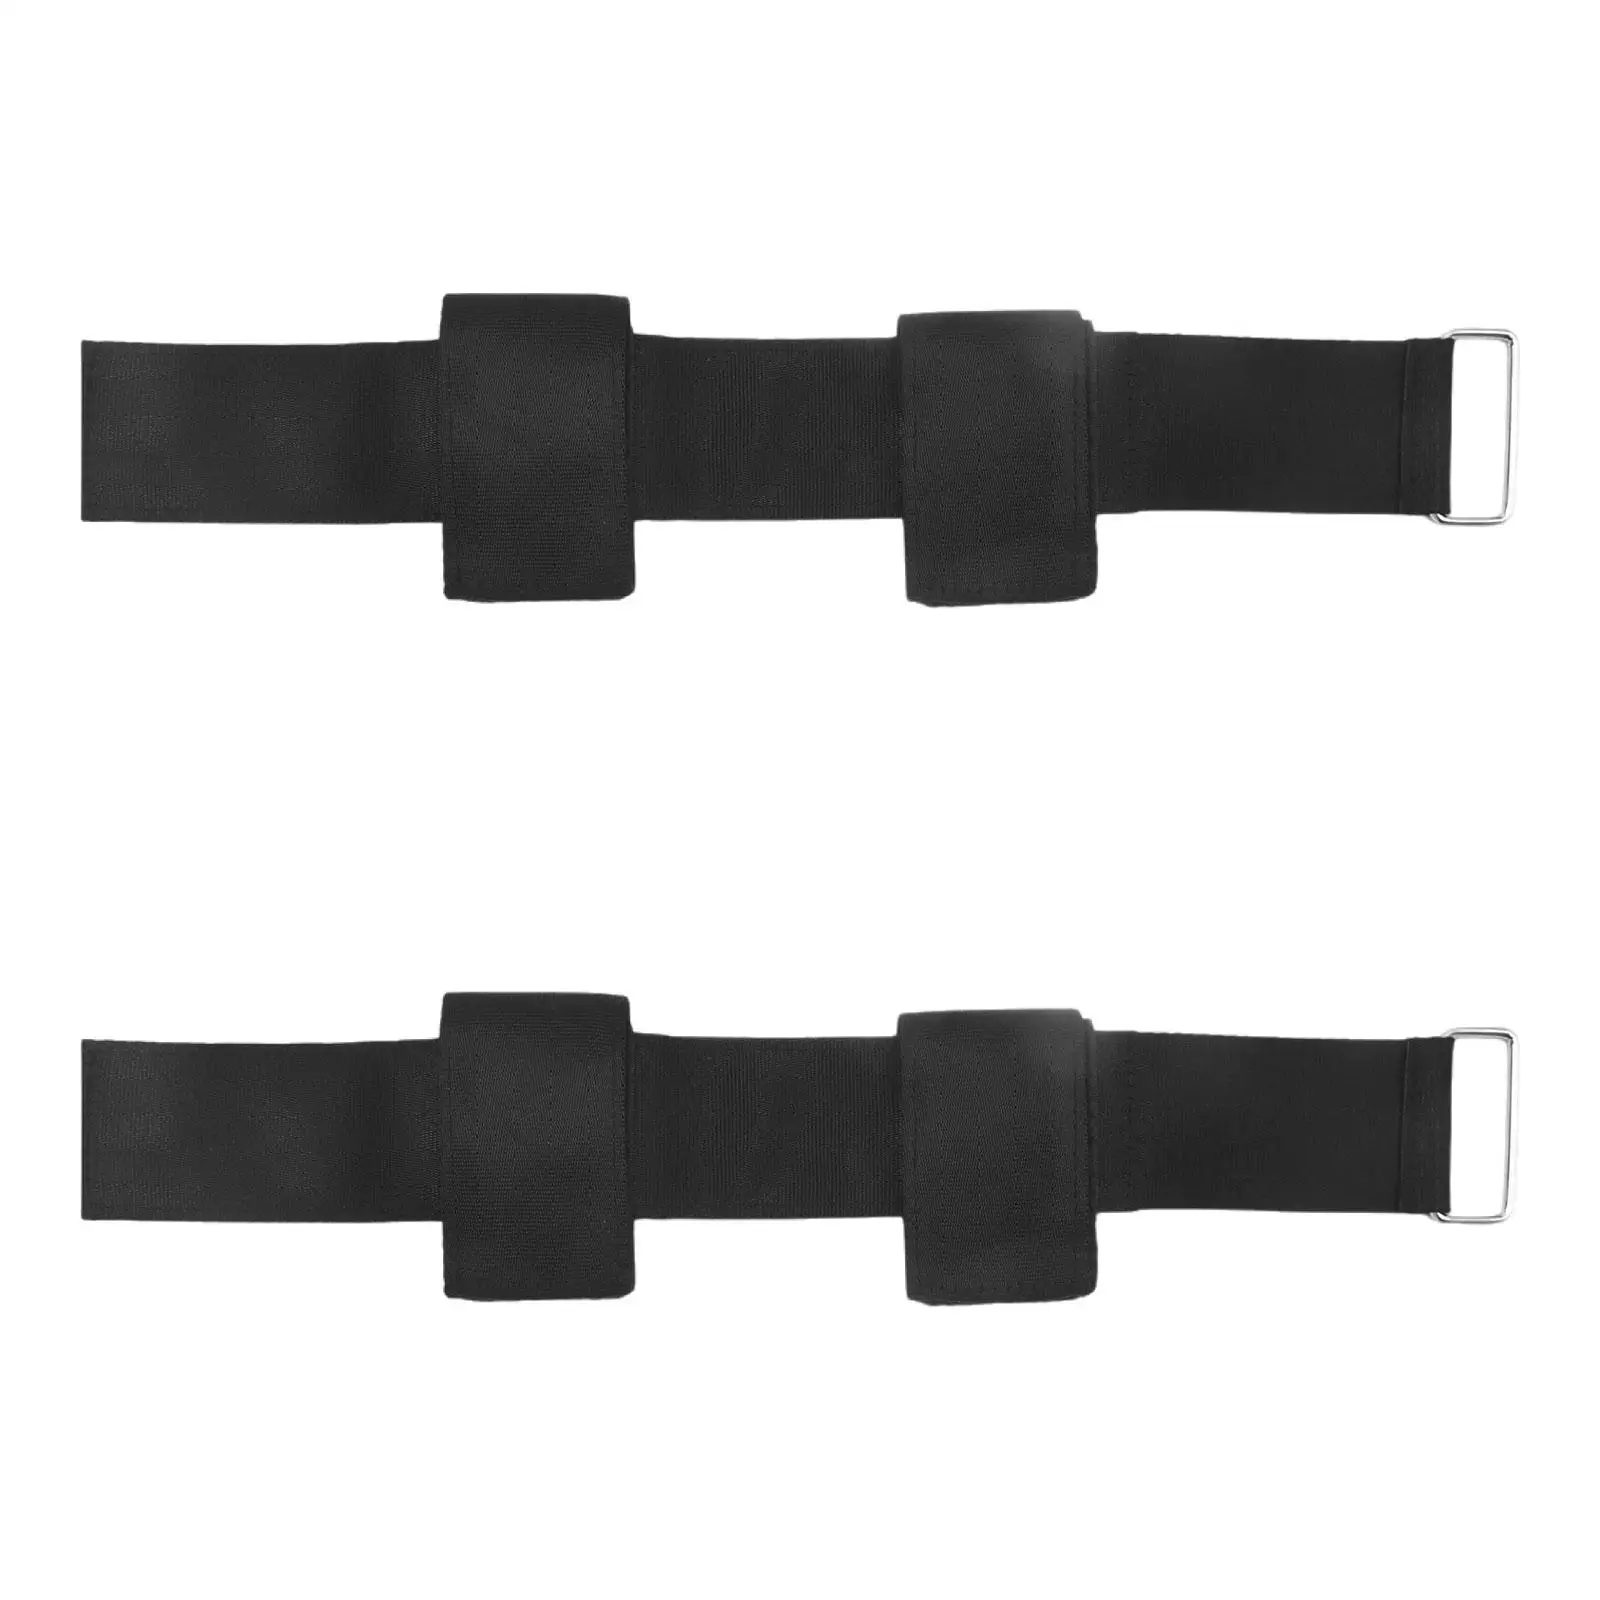 2 Pieces Dumbbell Foot Straps, Tibialis Trainer Strap, Dumbbell Attachment for Feet